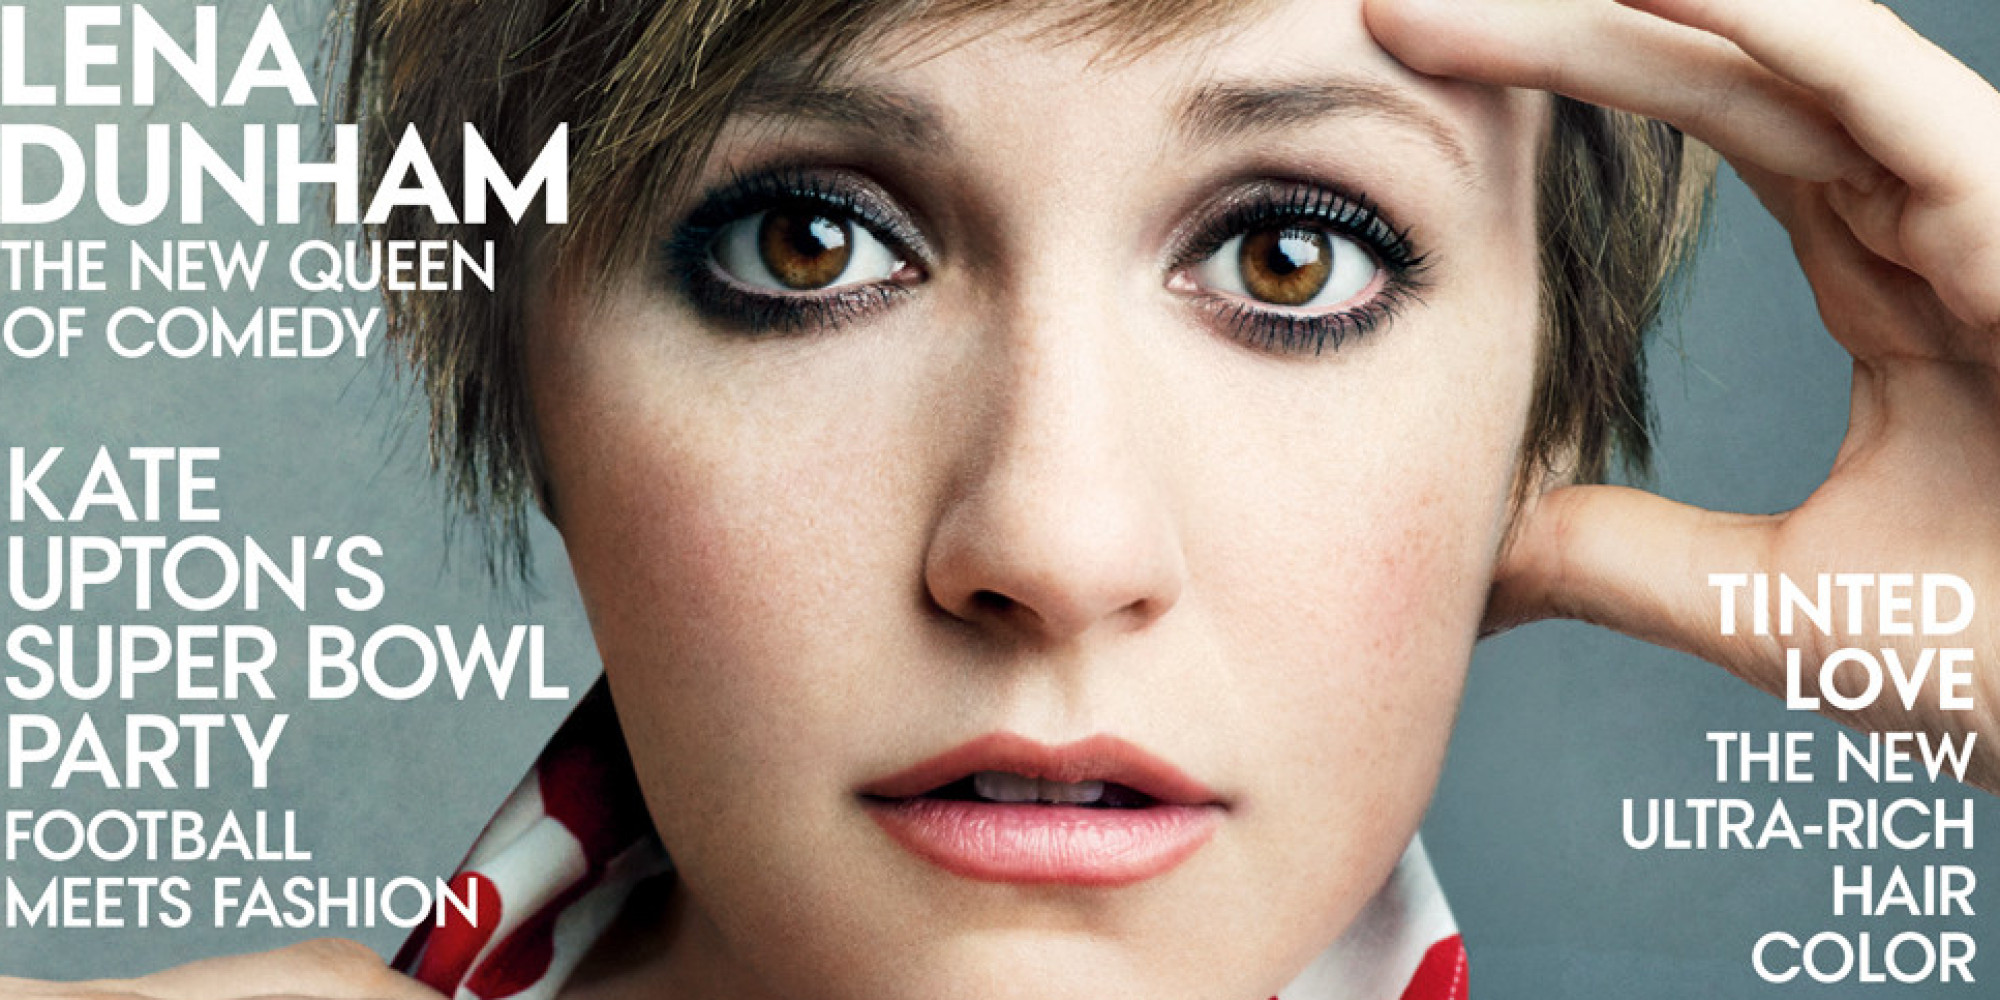 Lena Dunham S Vogue Cover Is Here And It S Beautiful Photos